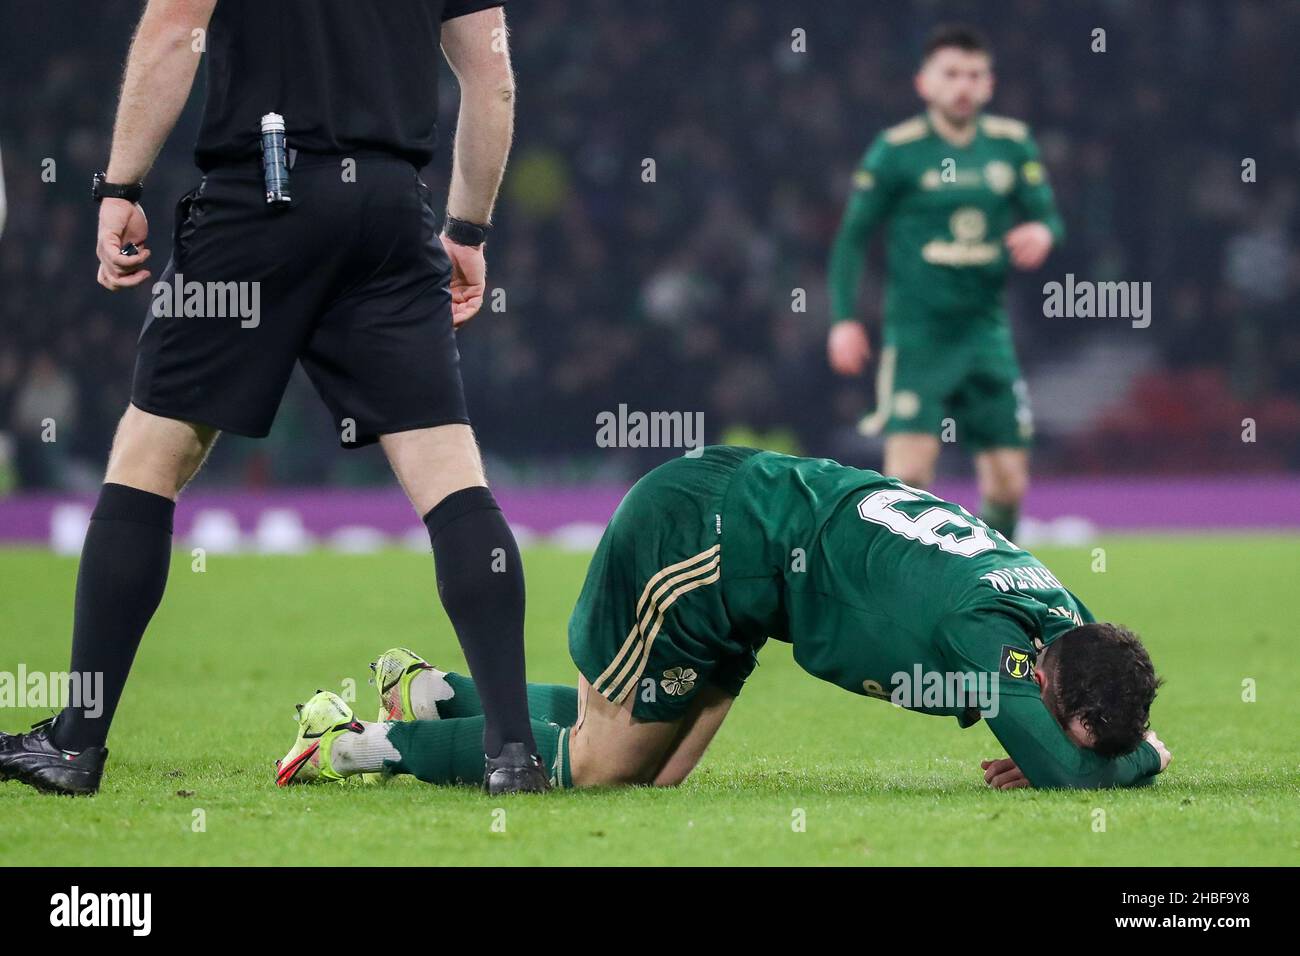 Glasgow, UK. 20th Dec, 2021. The Premier Sports Cup Final (previous known as the Scottish League Cup) was played at Hampden Park, Glasgow between Hibernian FC and Celtic FC. The match was played in front of a maximum crowd of 50,000. Credit: Findlay/Alamy Live News Stock Photo